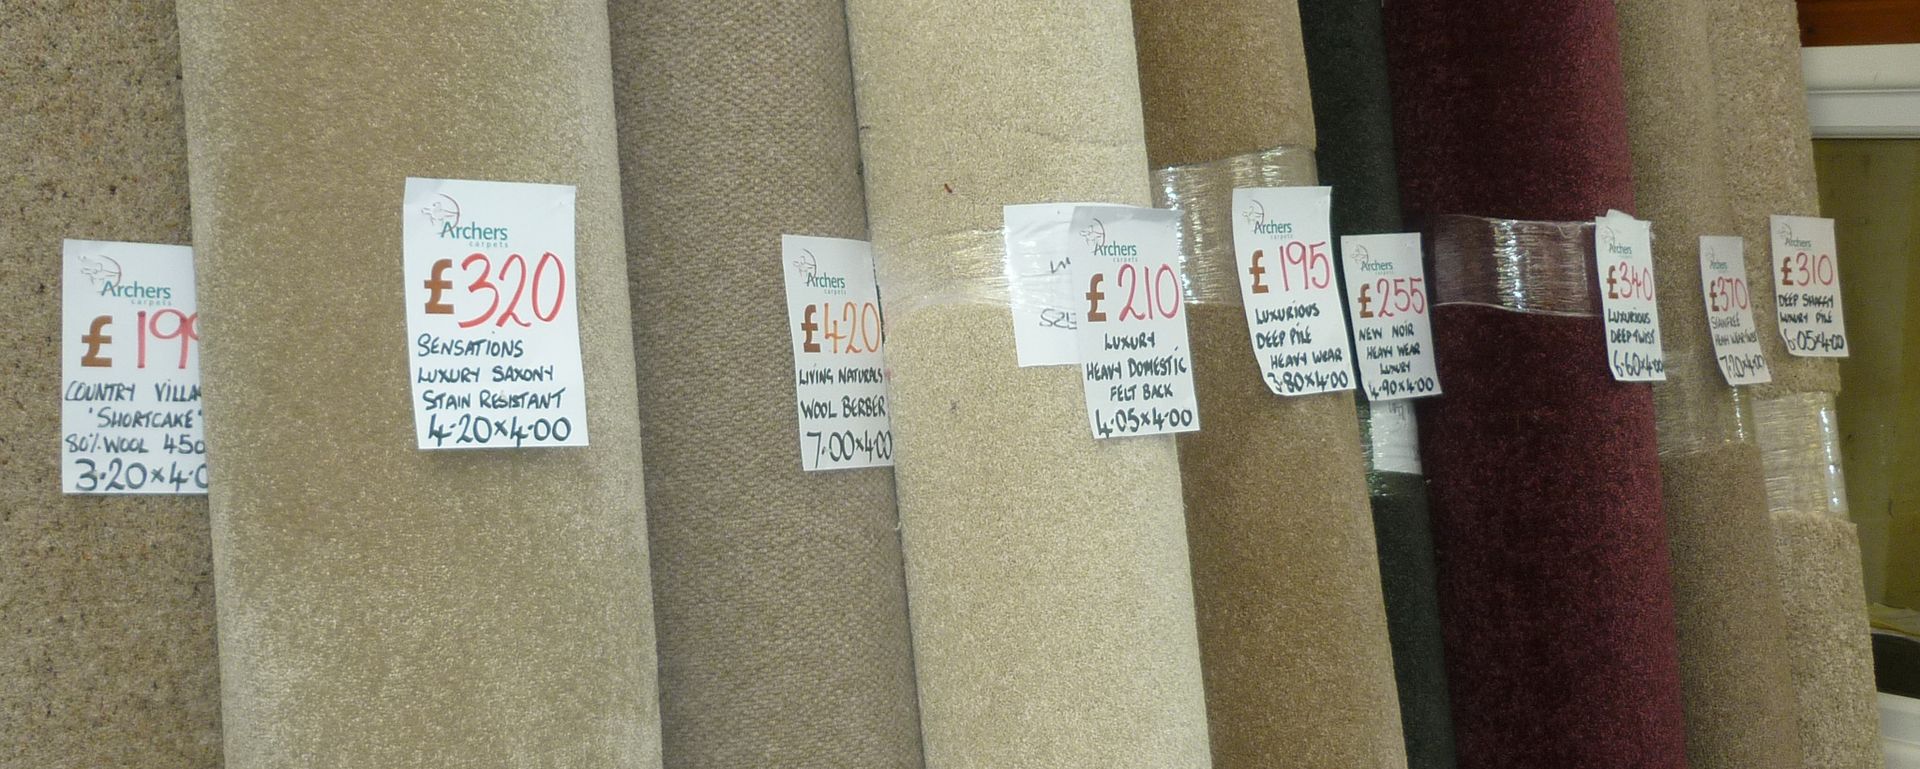 Flooring prices in Clitheroe